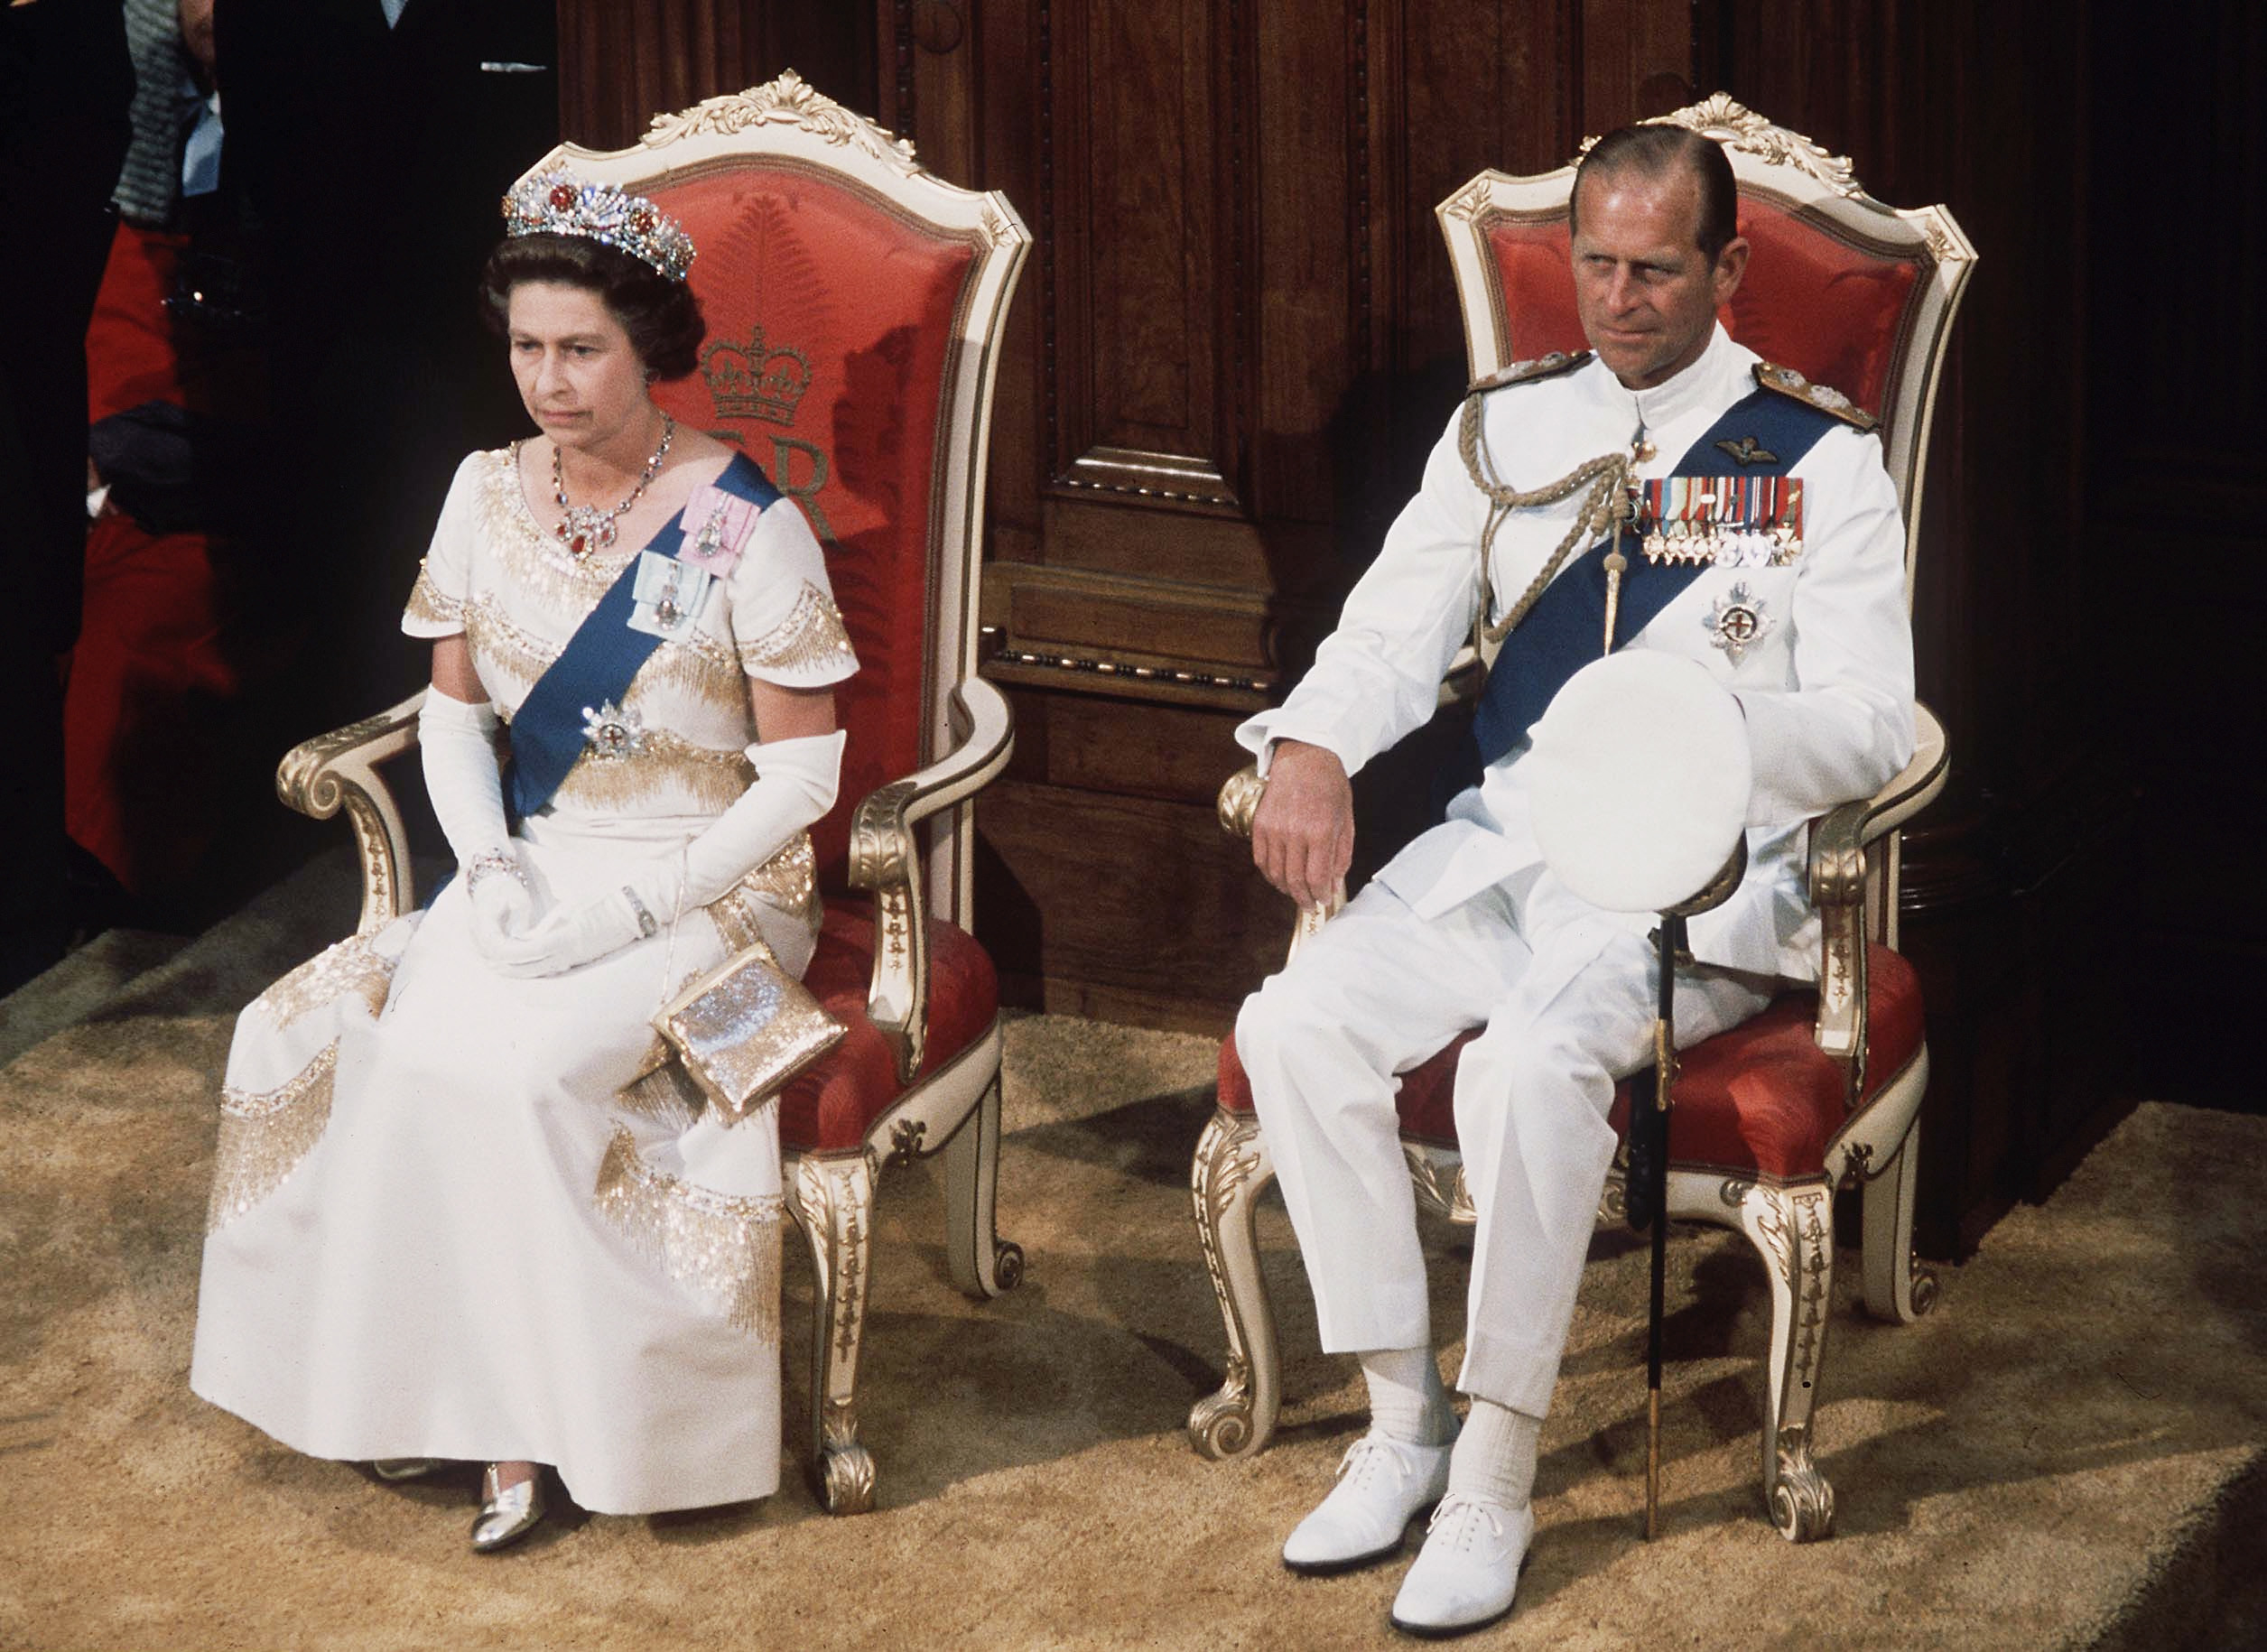 Queen Elizabeth II  and prince philip in regalia on chairs